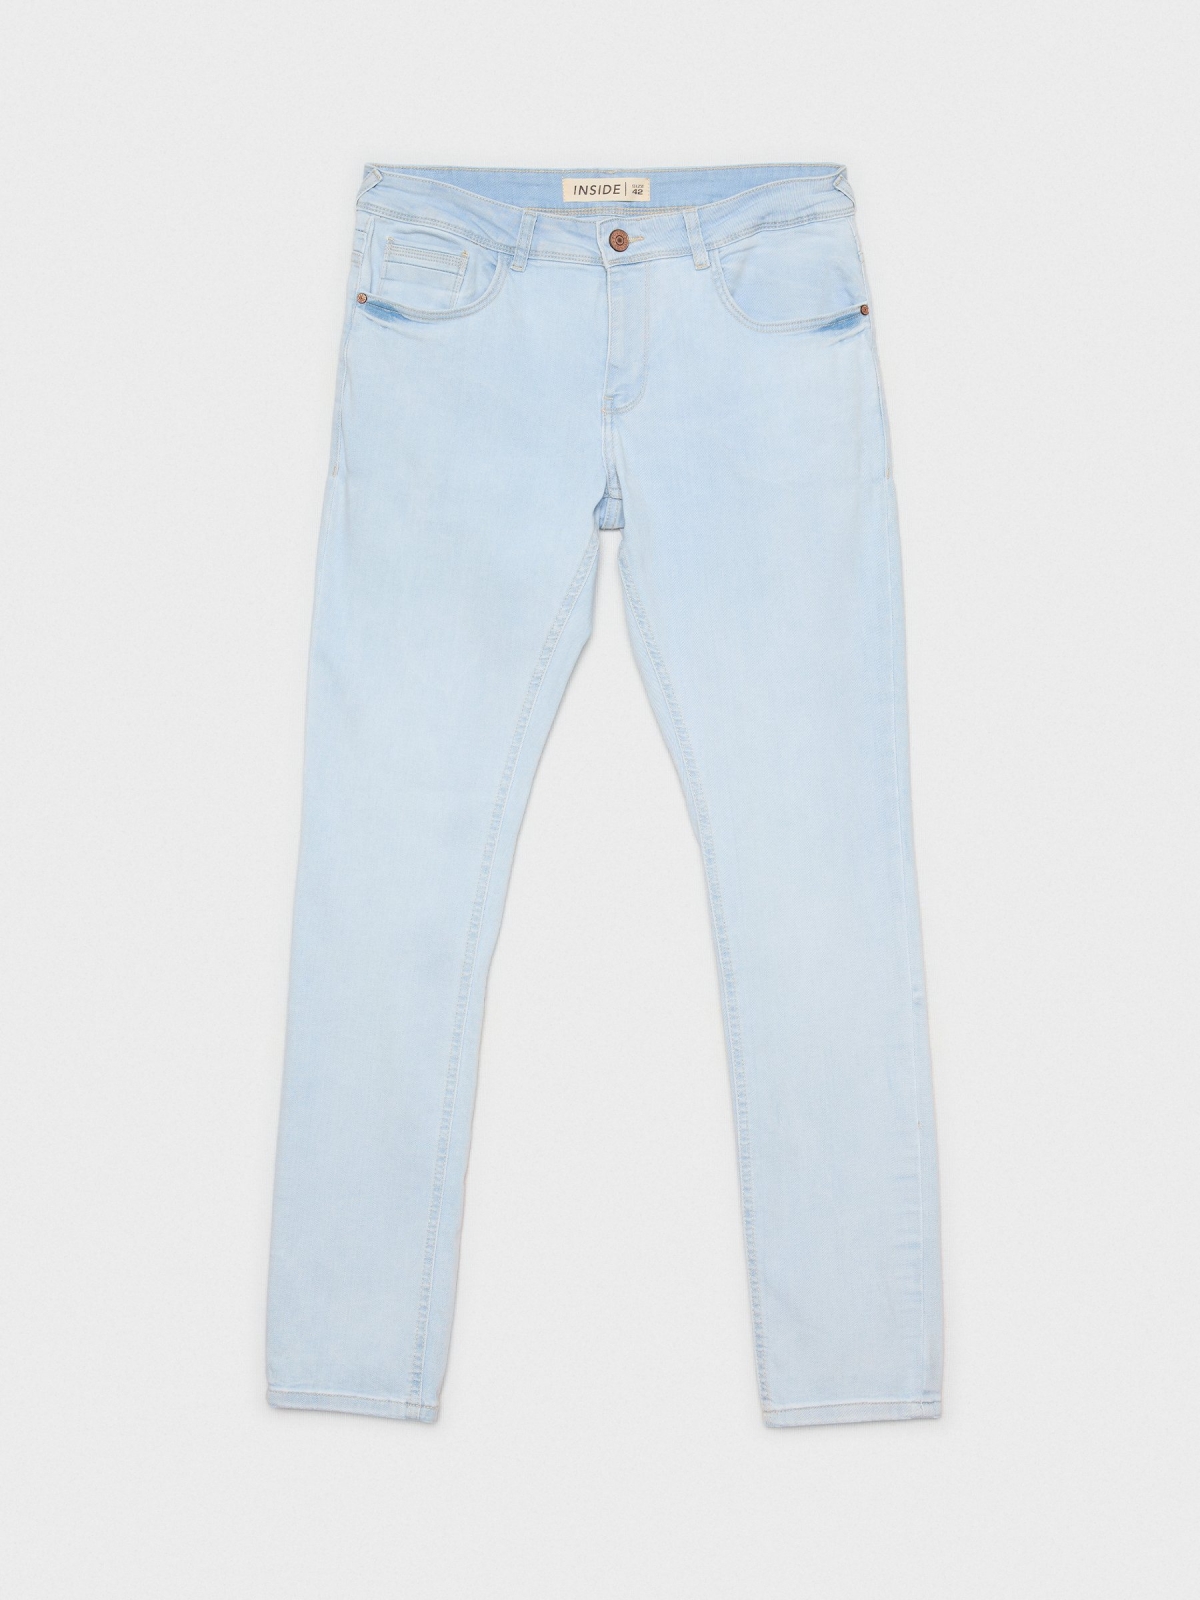  Slim-bleached jeans blue/white